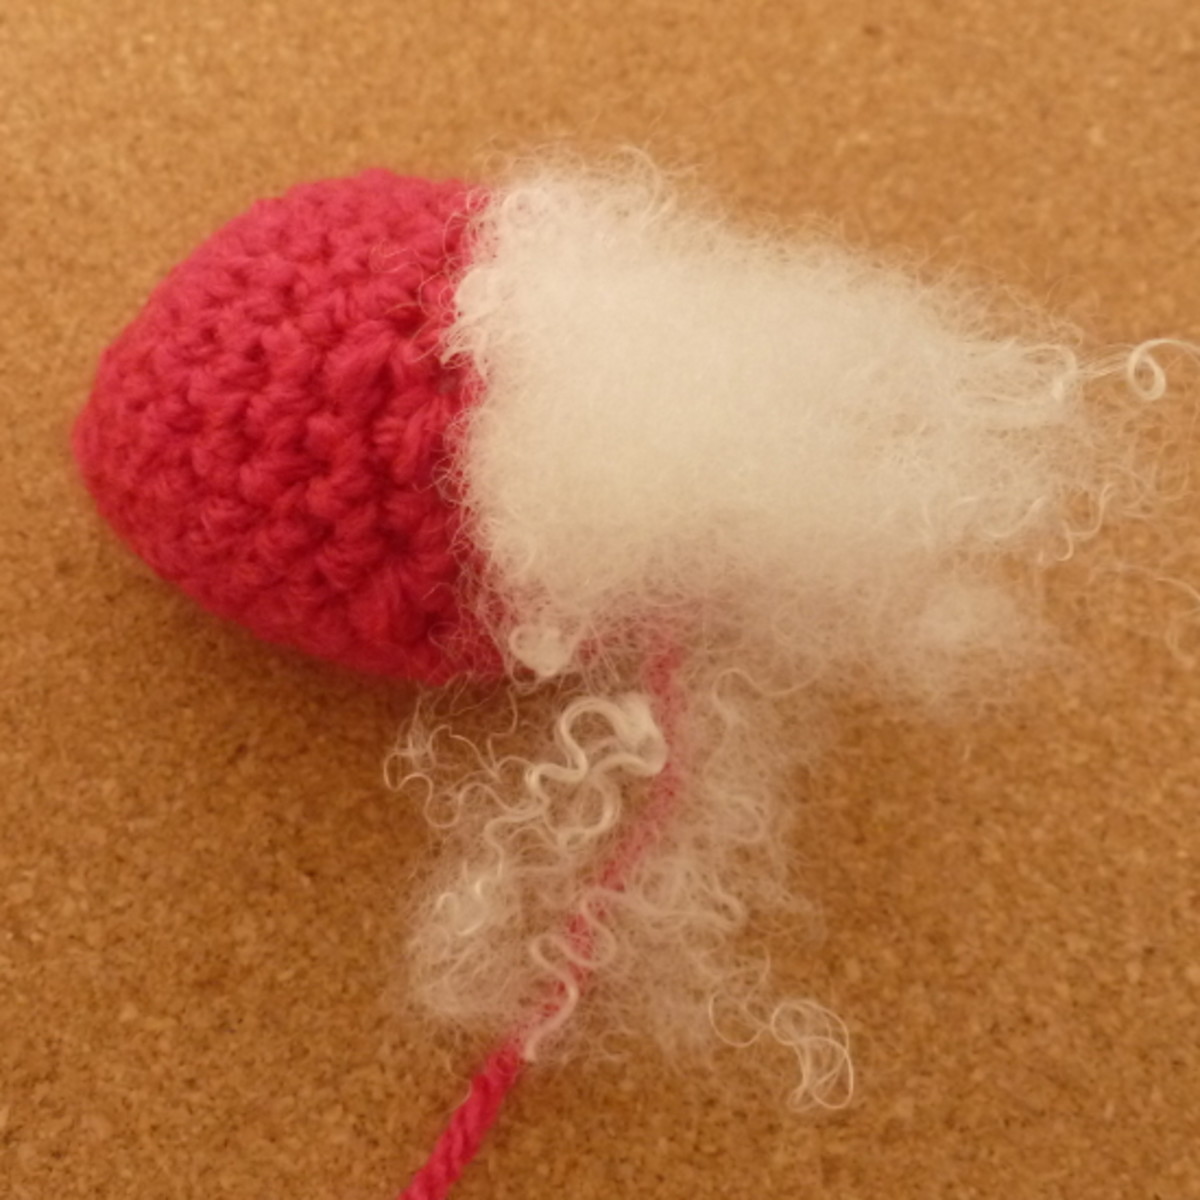 Start to fill your plush crochet strawberry with toy stuffing.